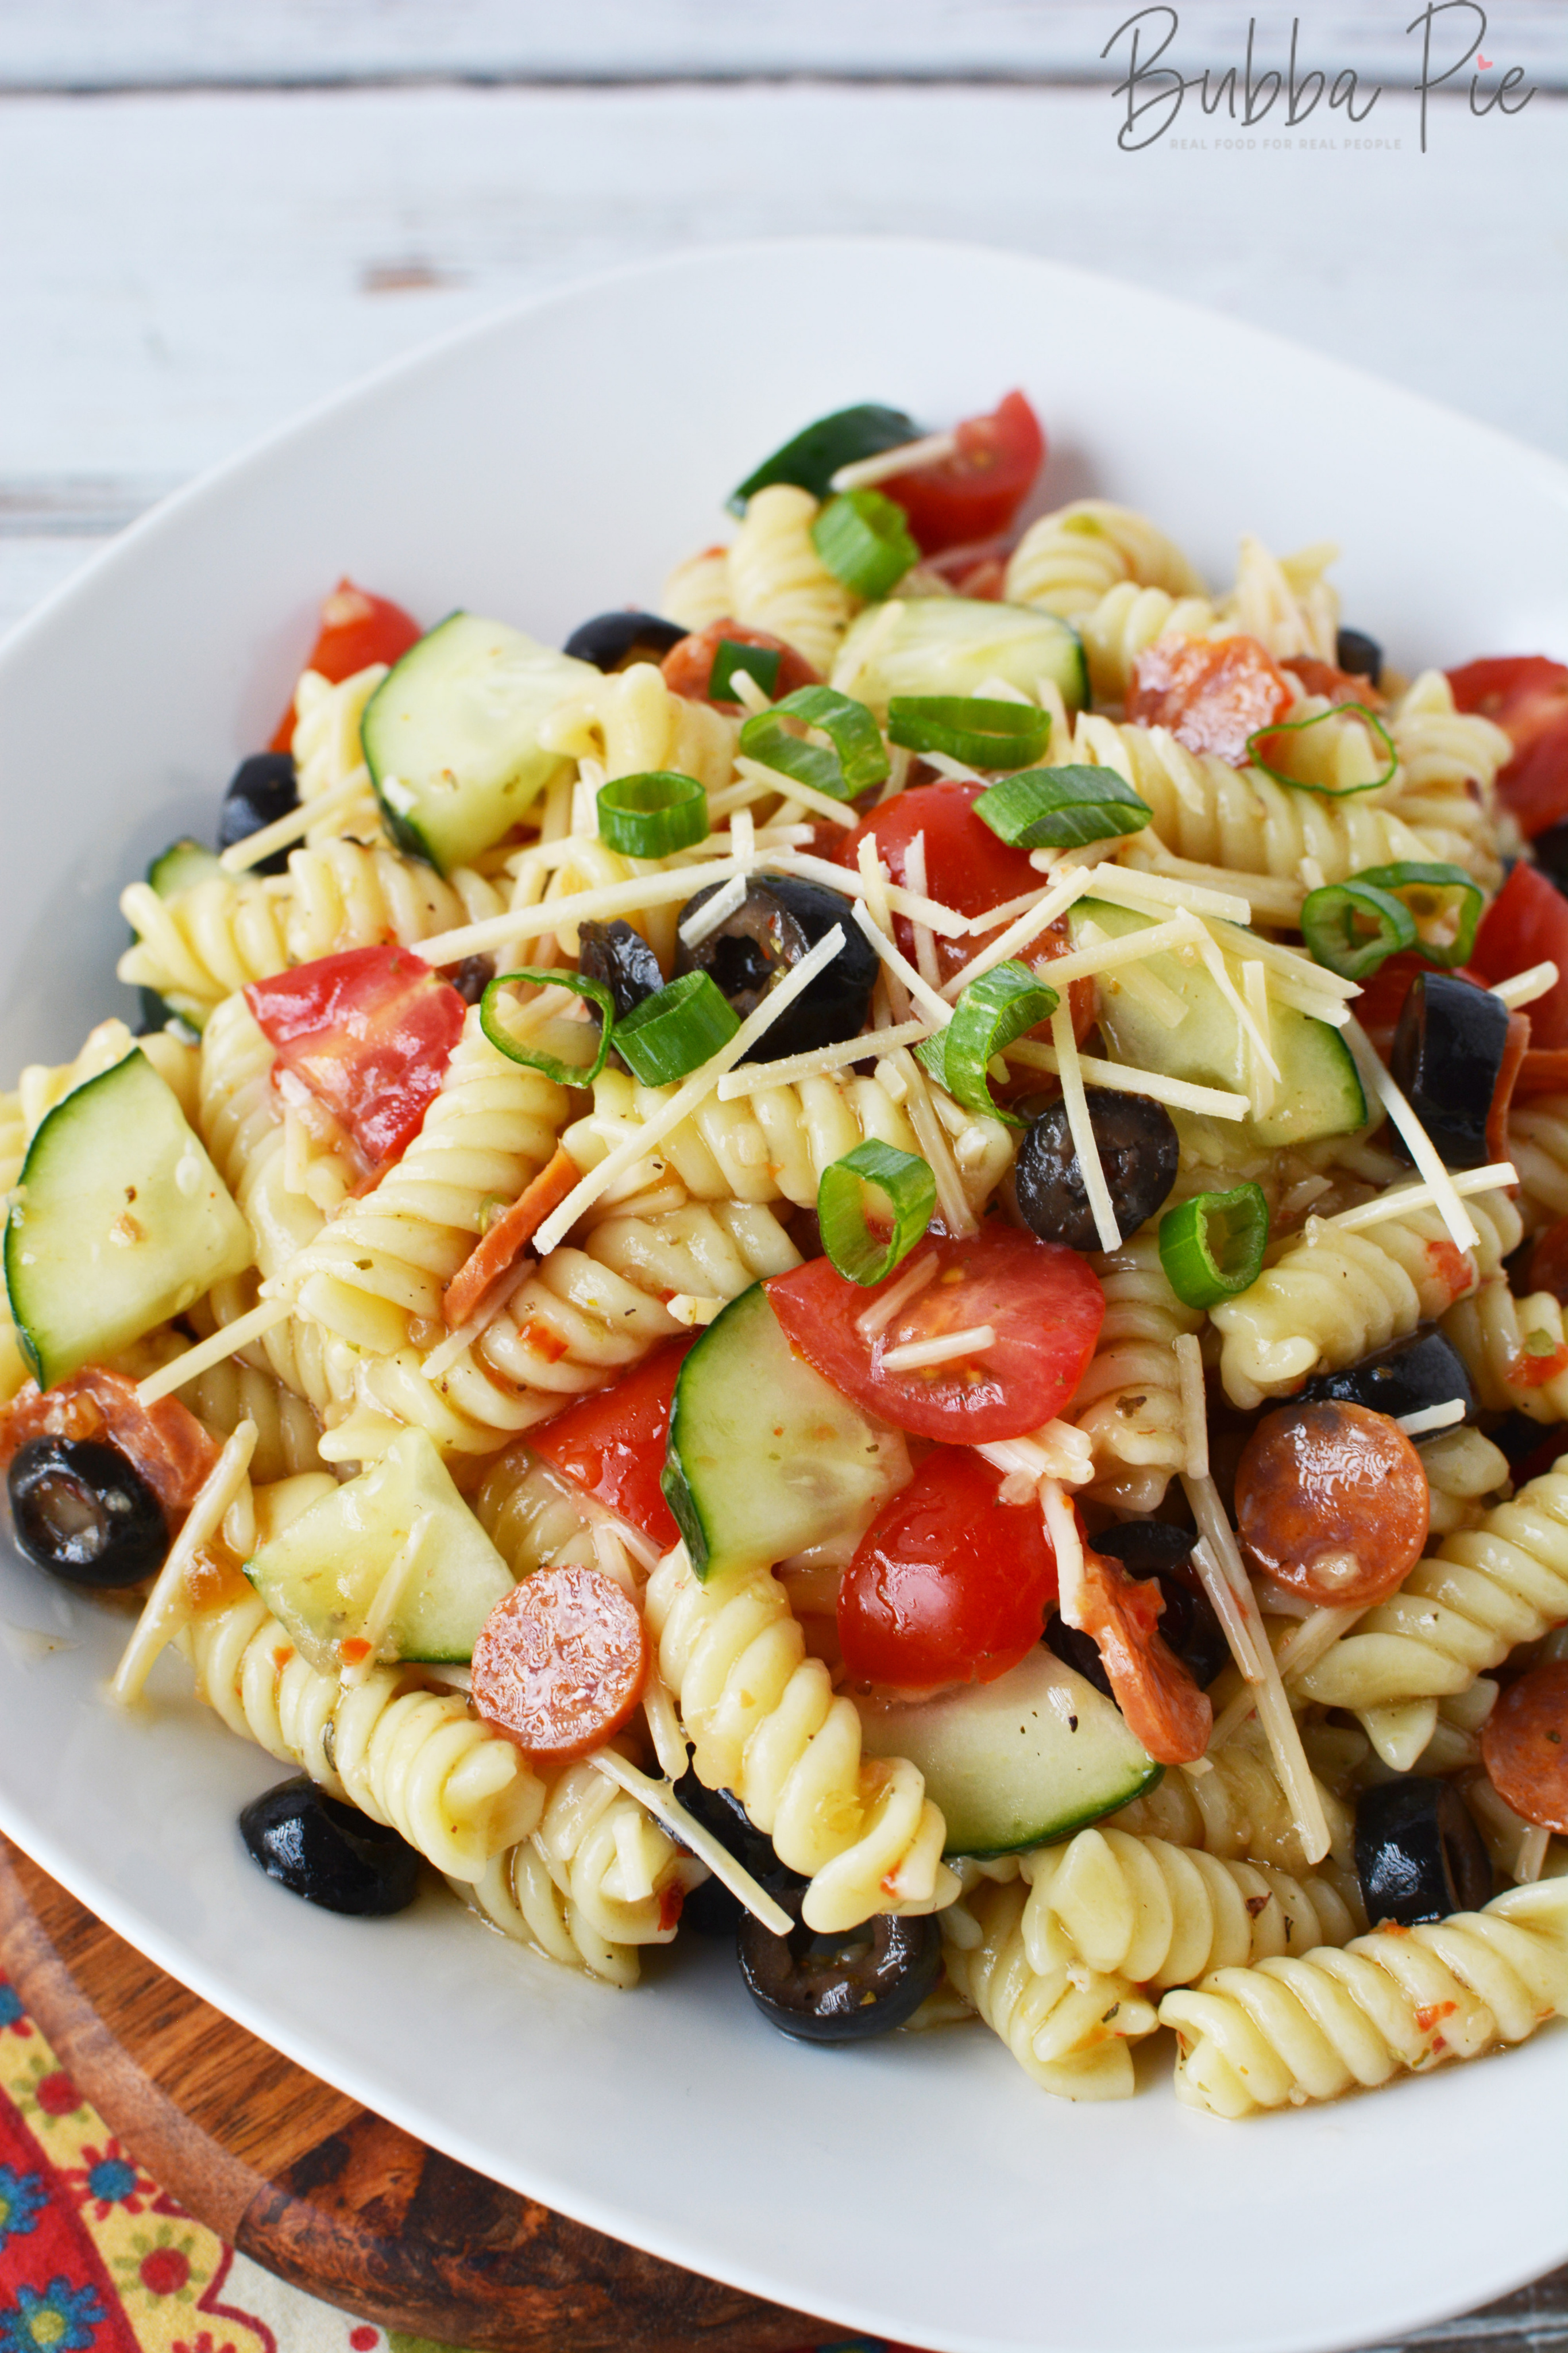 cold pasta salad recipes like this rotini salad are a quick easy and fun side dish